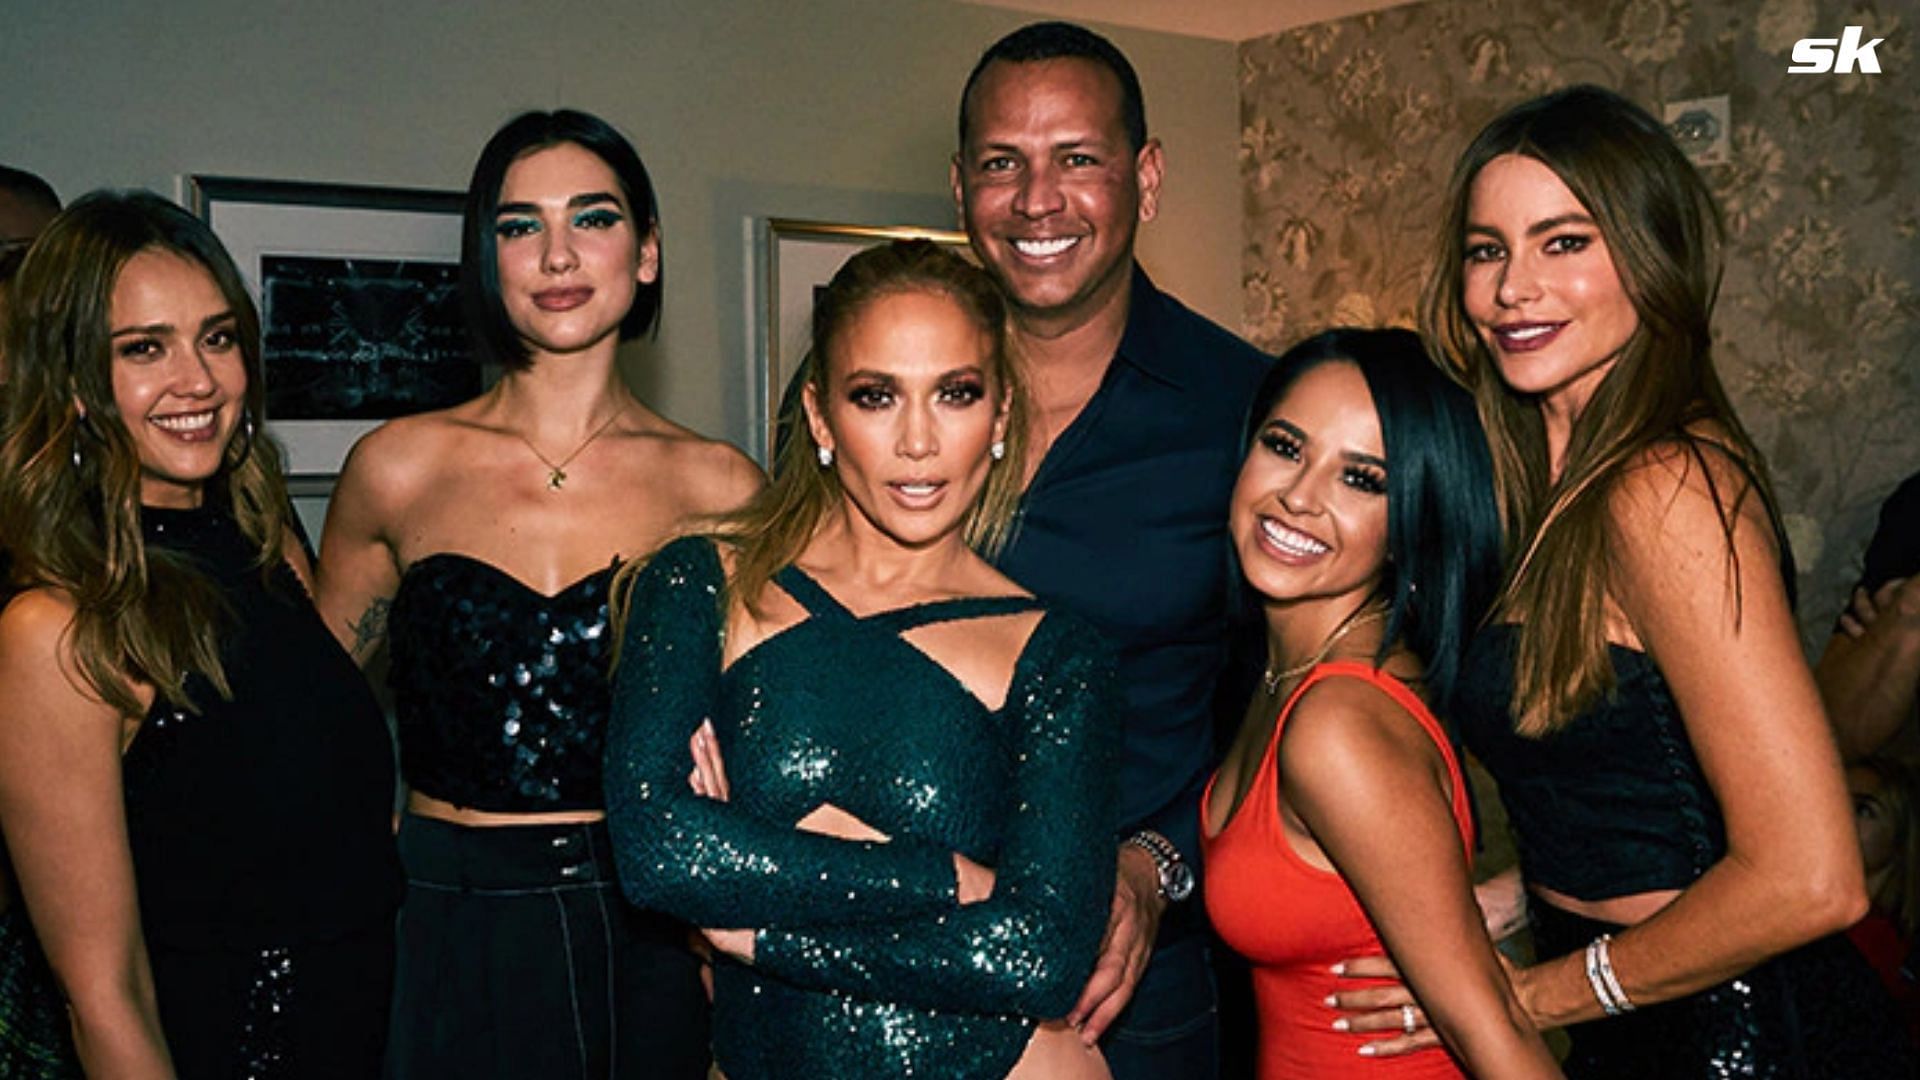 Jennifer Lopez along with Jessica Alba, Dua Lipa, Becky G, Sofia Vergara and Alex Rodriguez at a backstage after-party in September 2018.